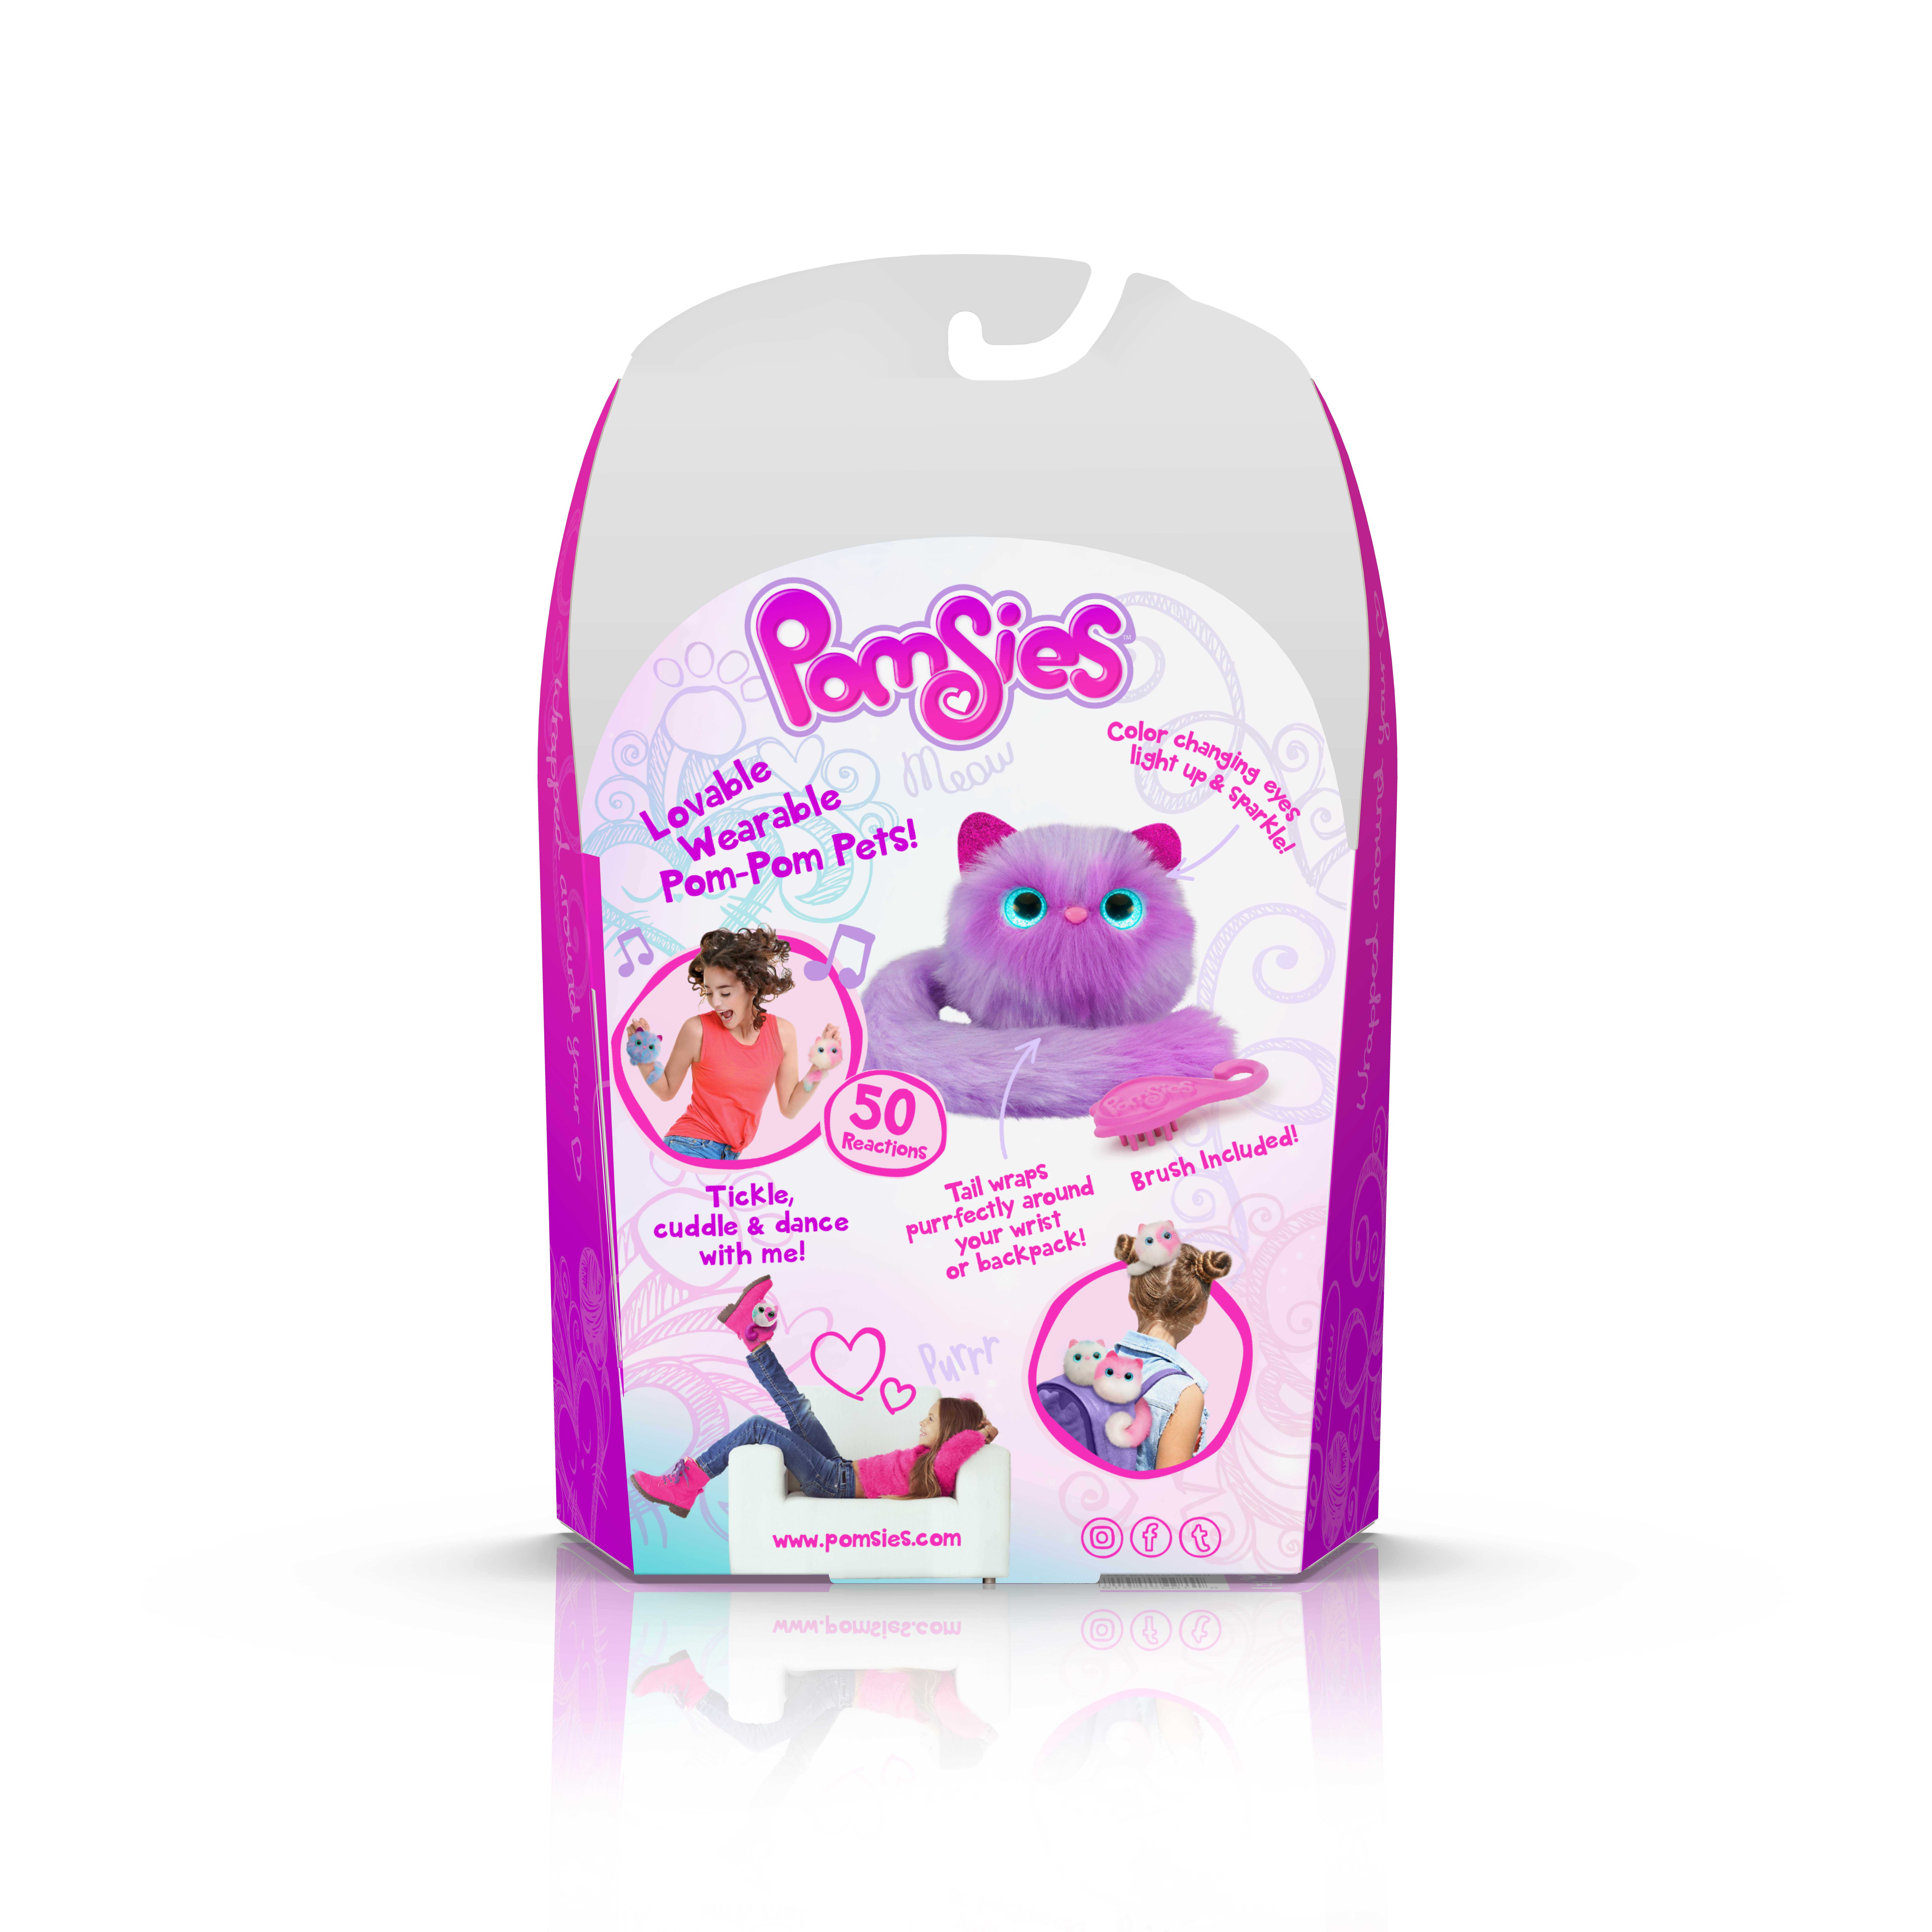 Pomsies Pet Boots- Plush Interactive Toy - image 2 of 4